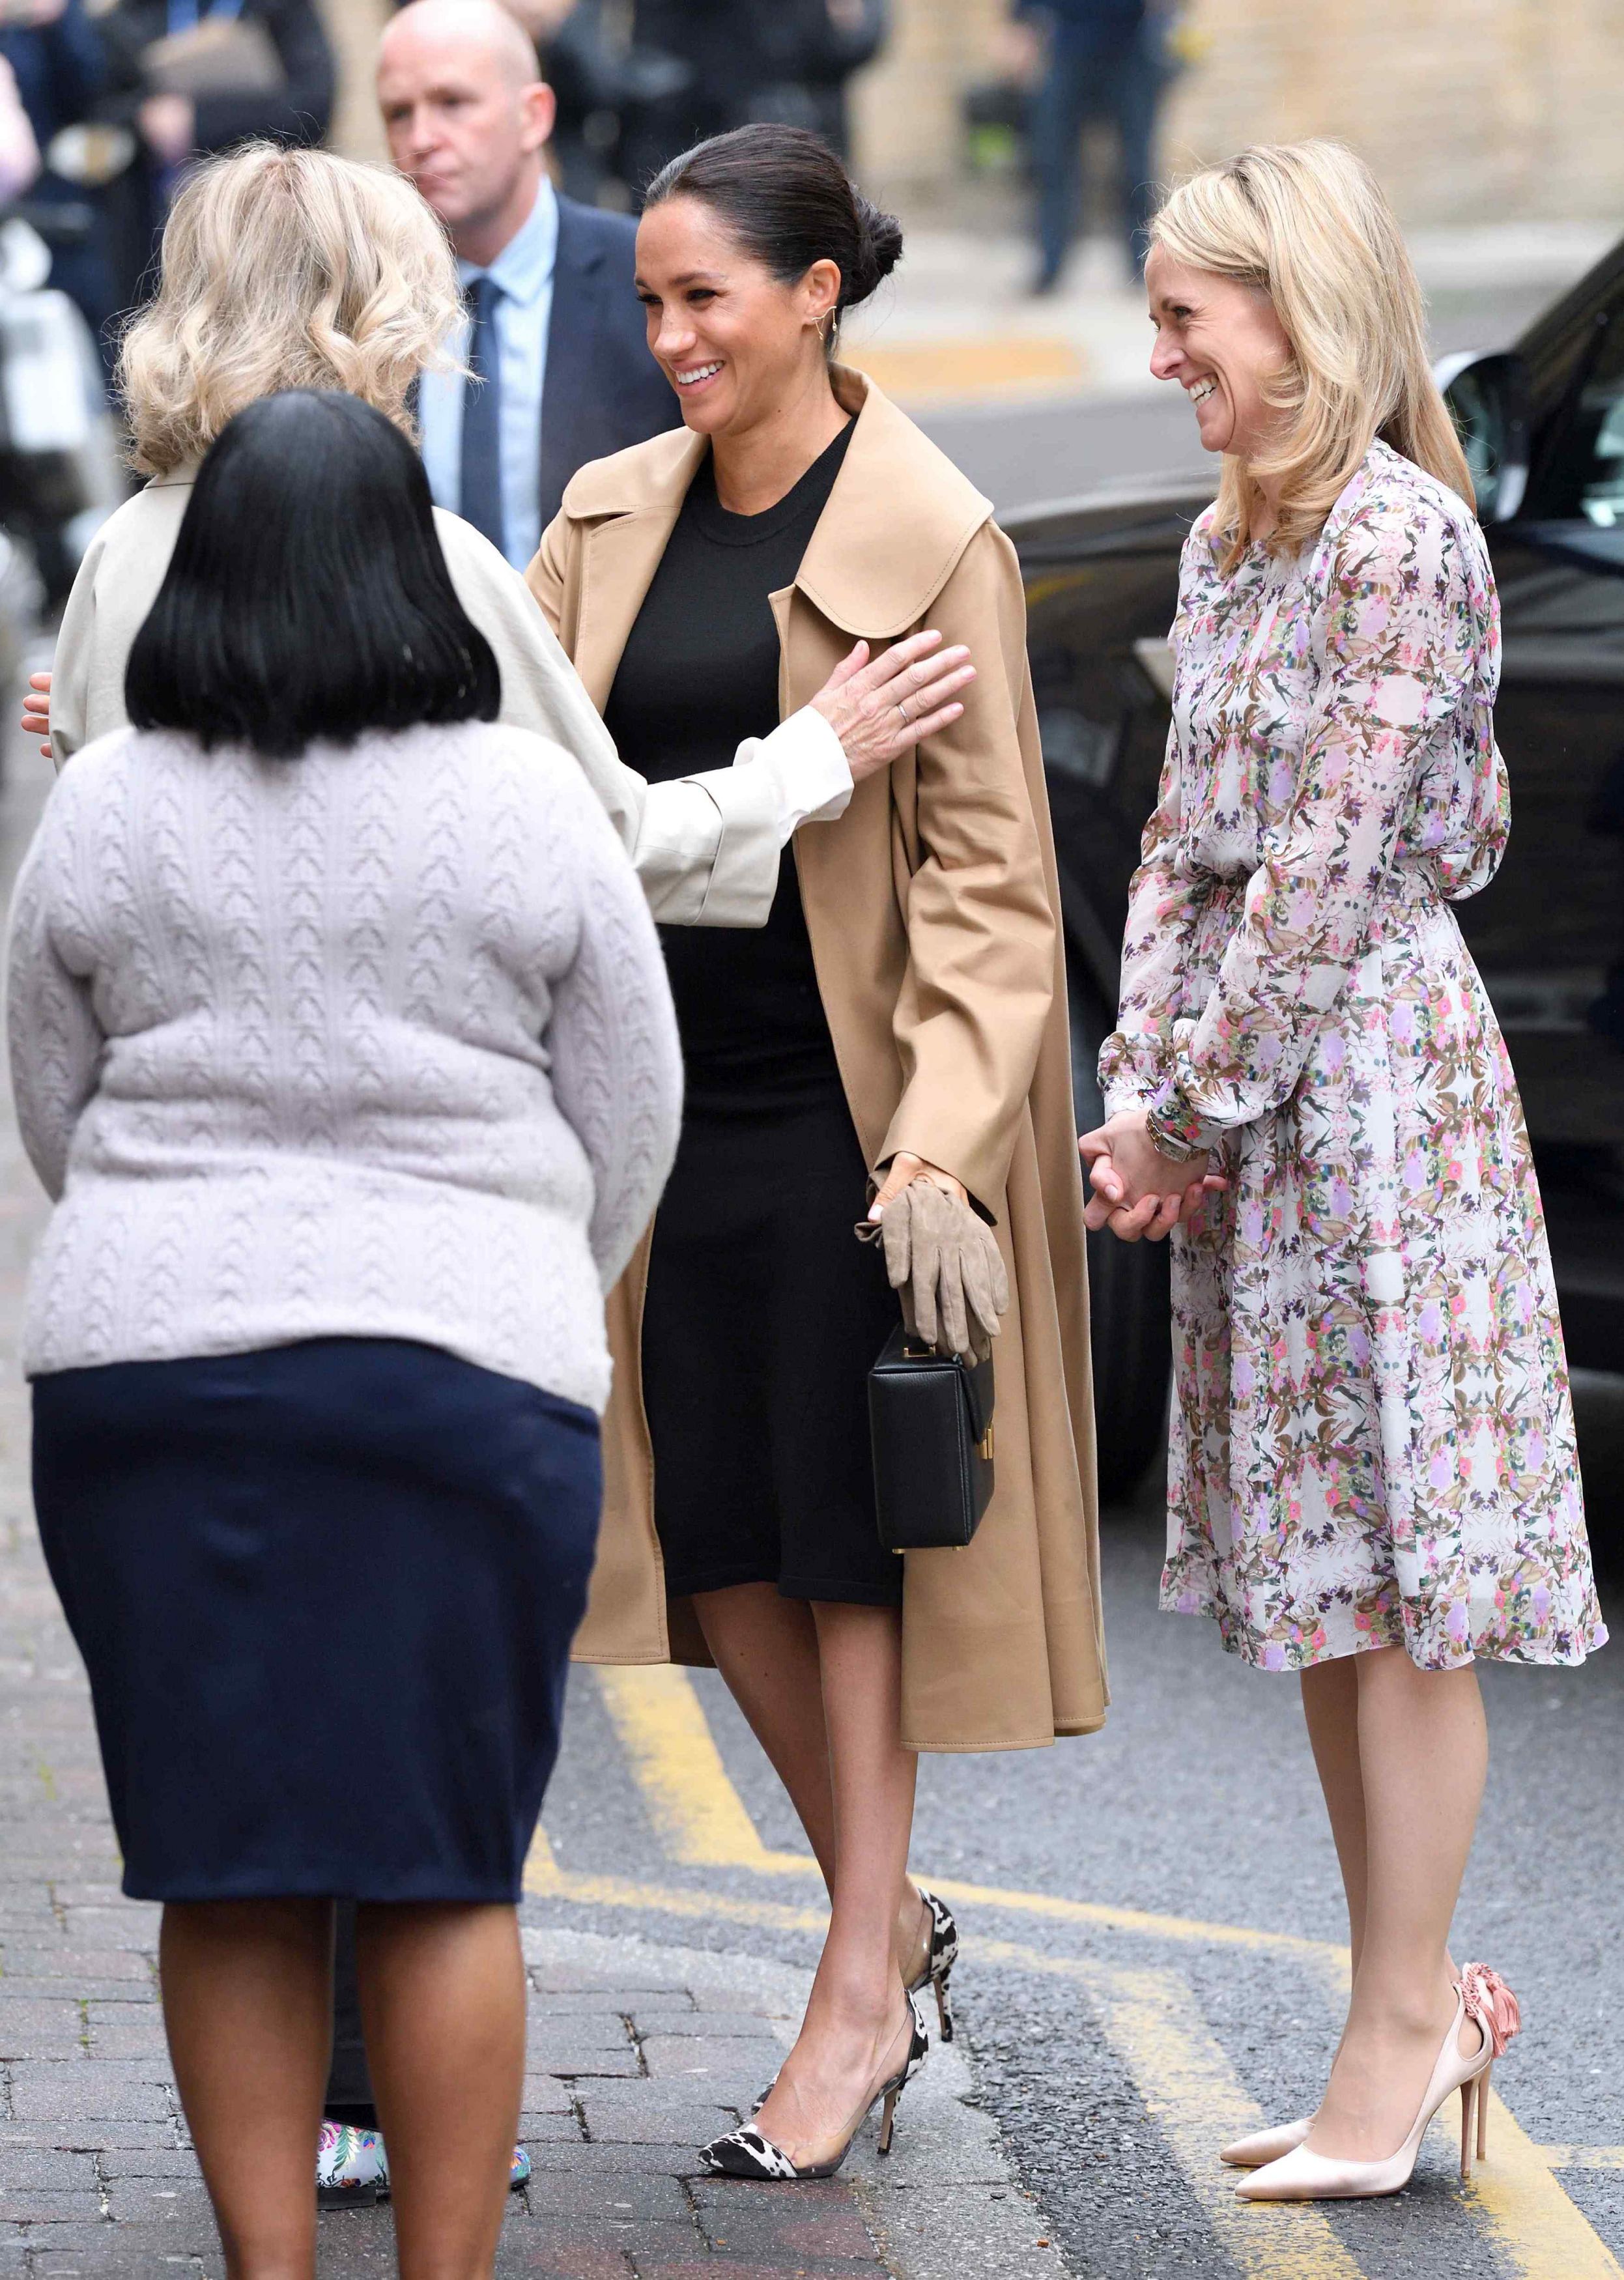 January 10 | The Duchess of Sussex Visits Smart Works - January102019 ...